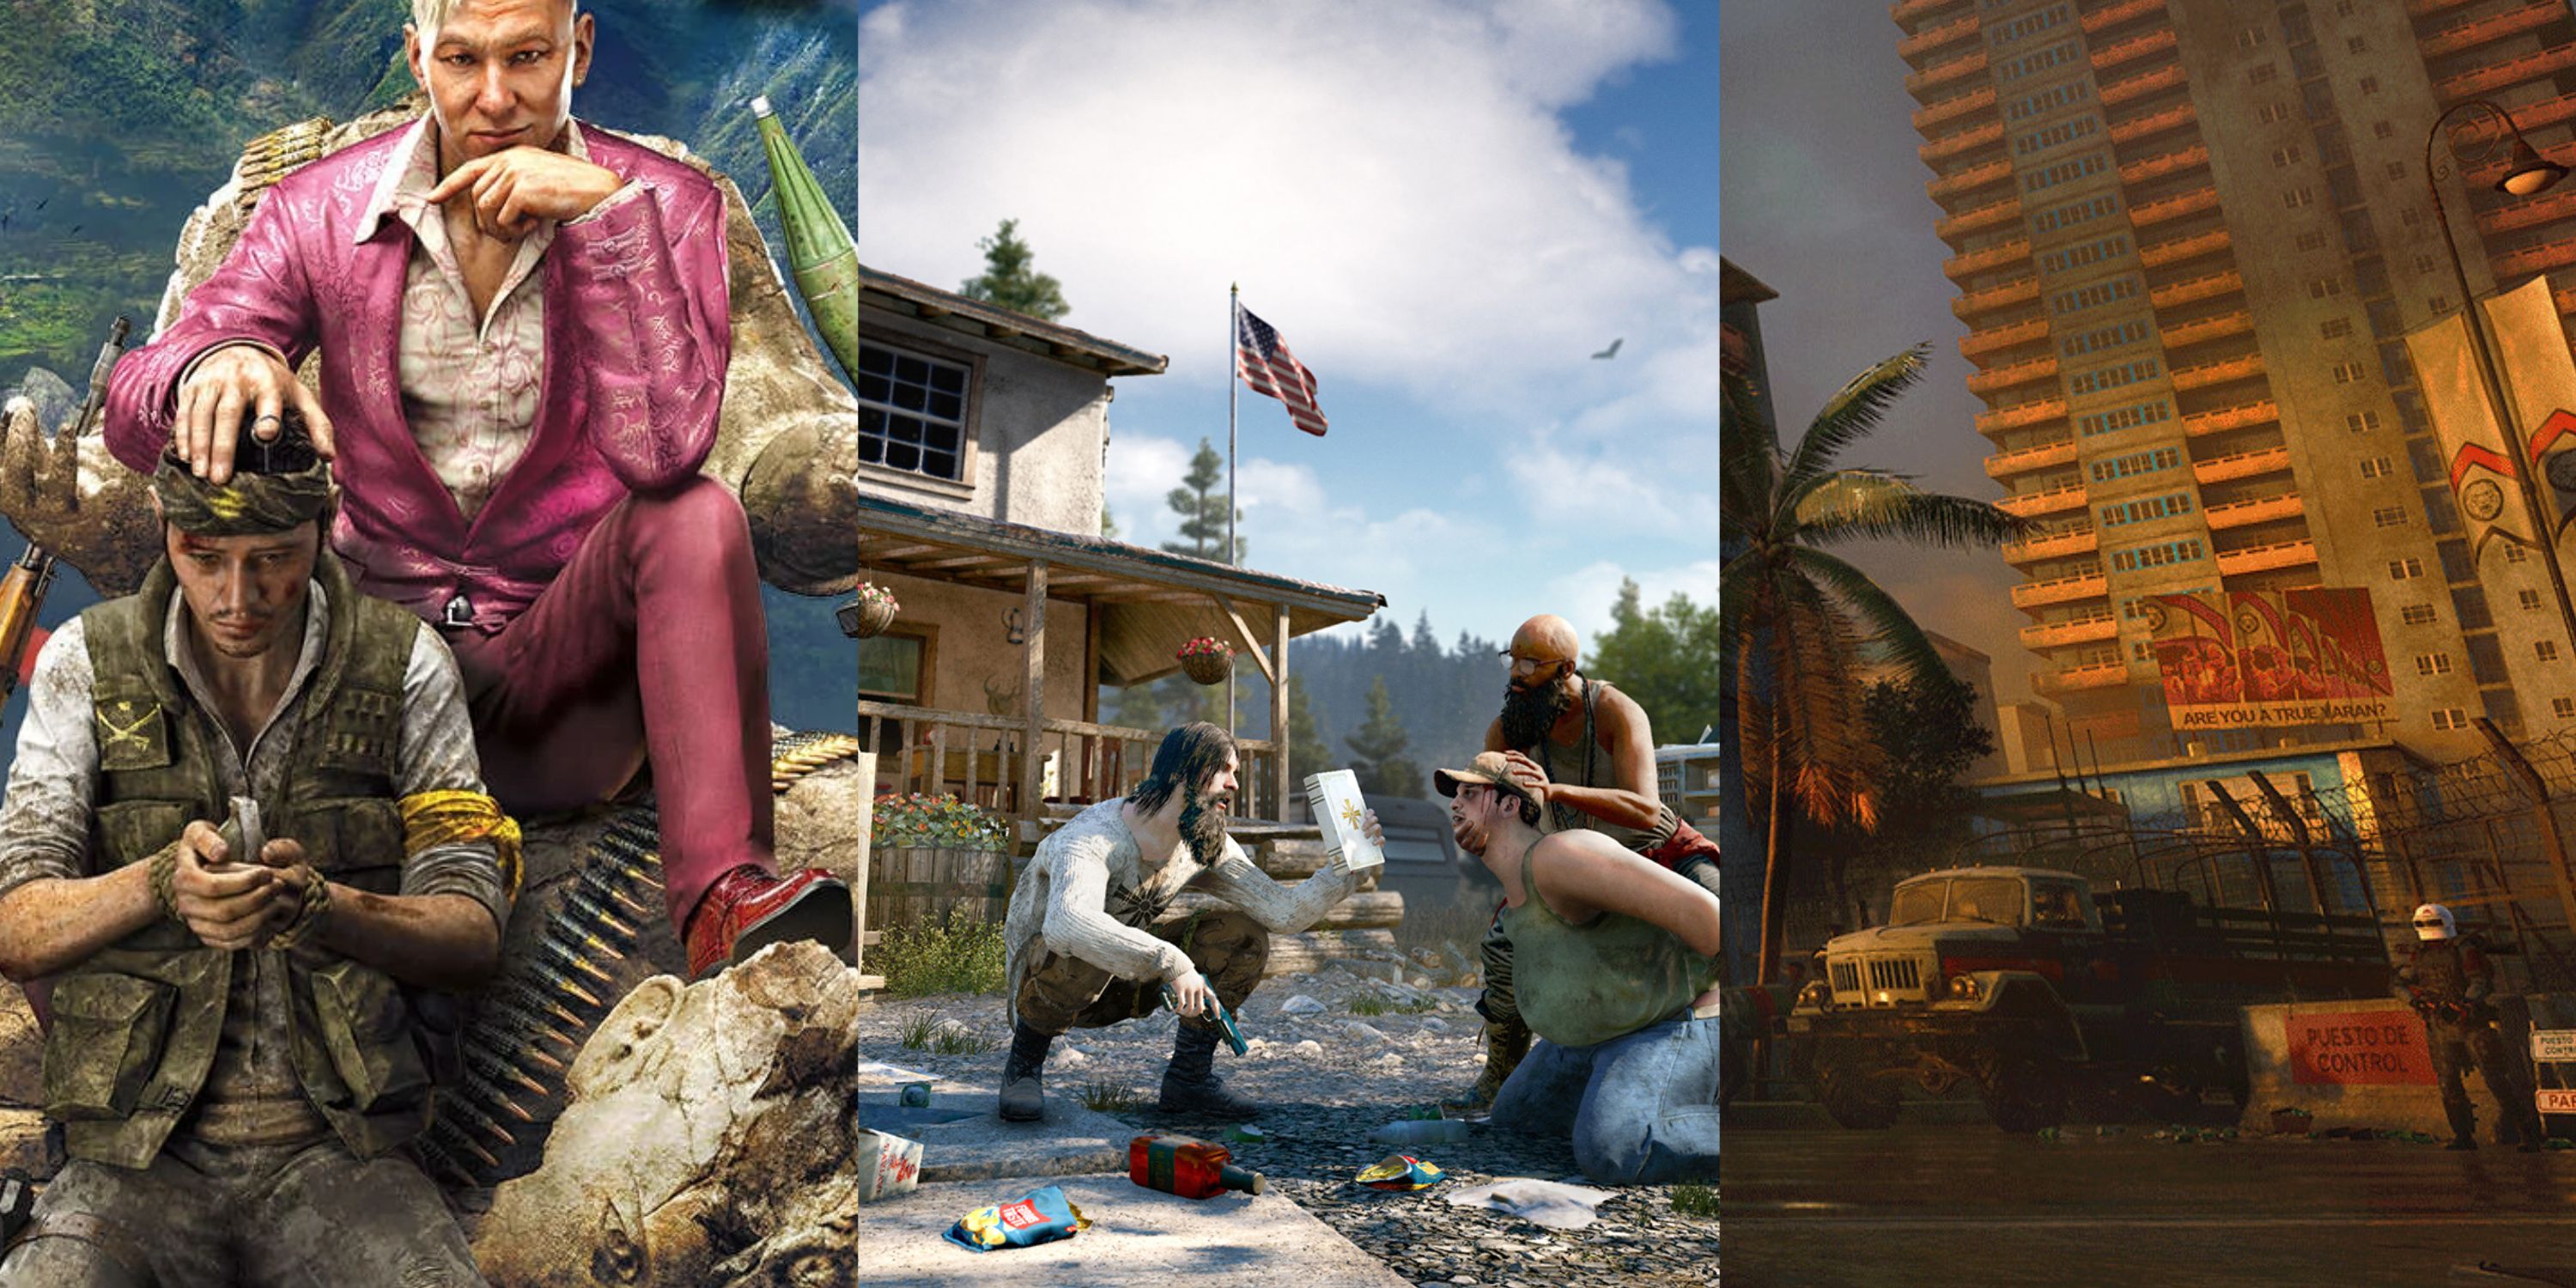 Pagan Min from Far Cry 4, Peggys from Far Cry 5, and Castillo ruled Yara from Far Cry 6